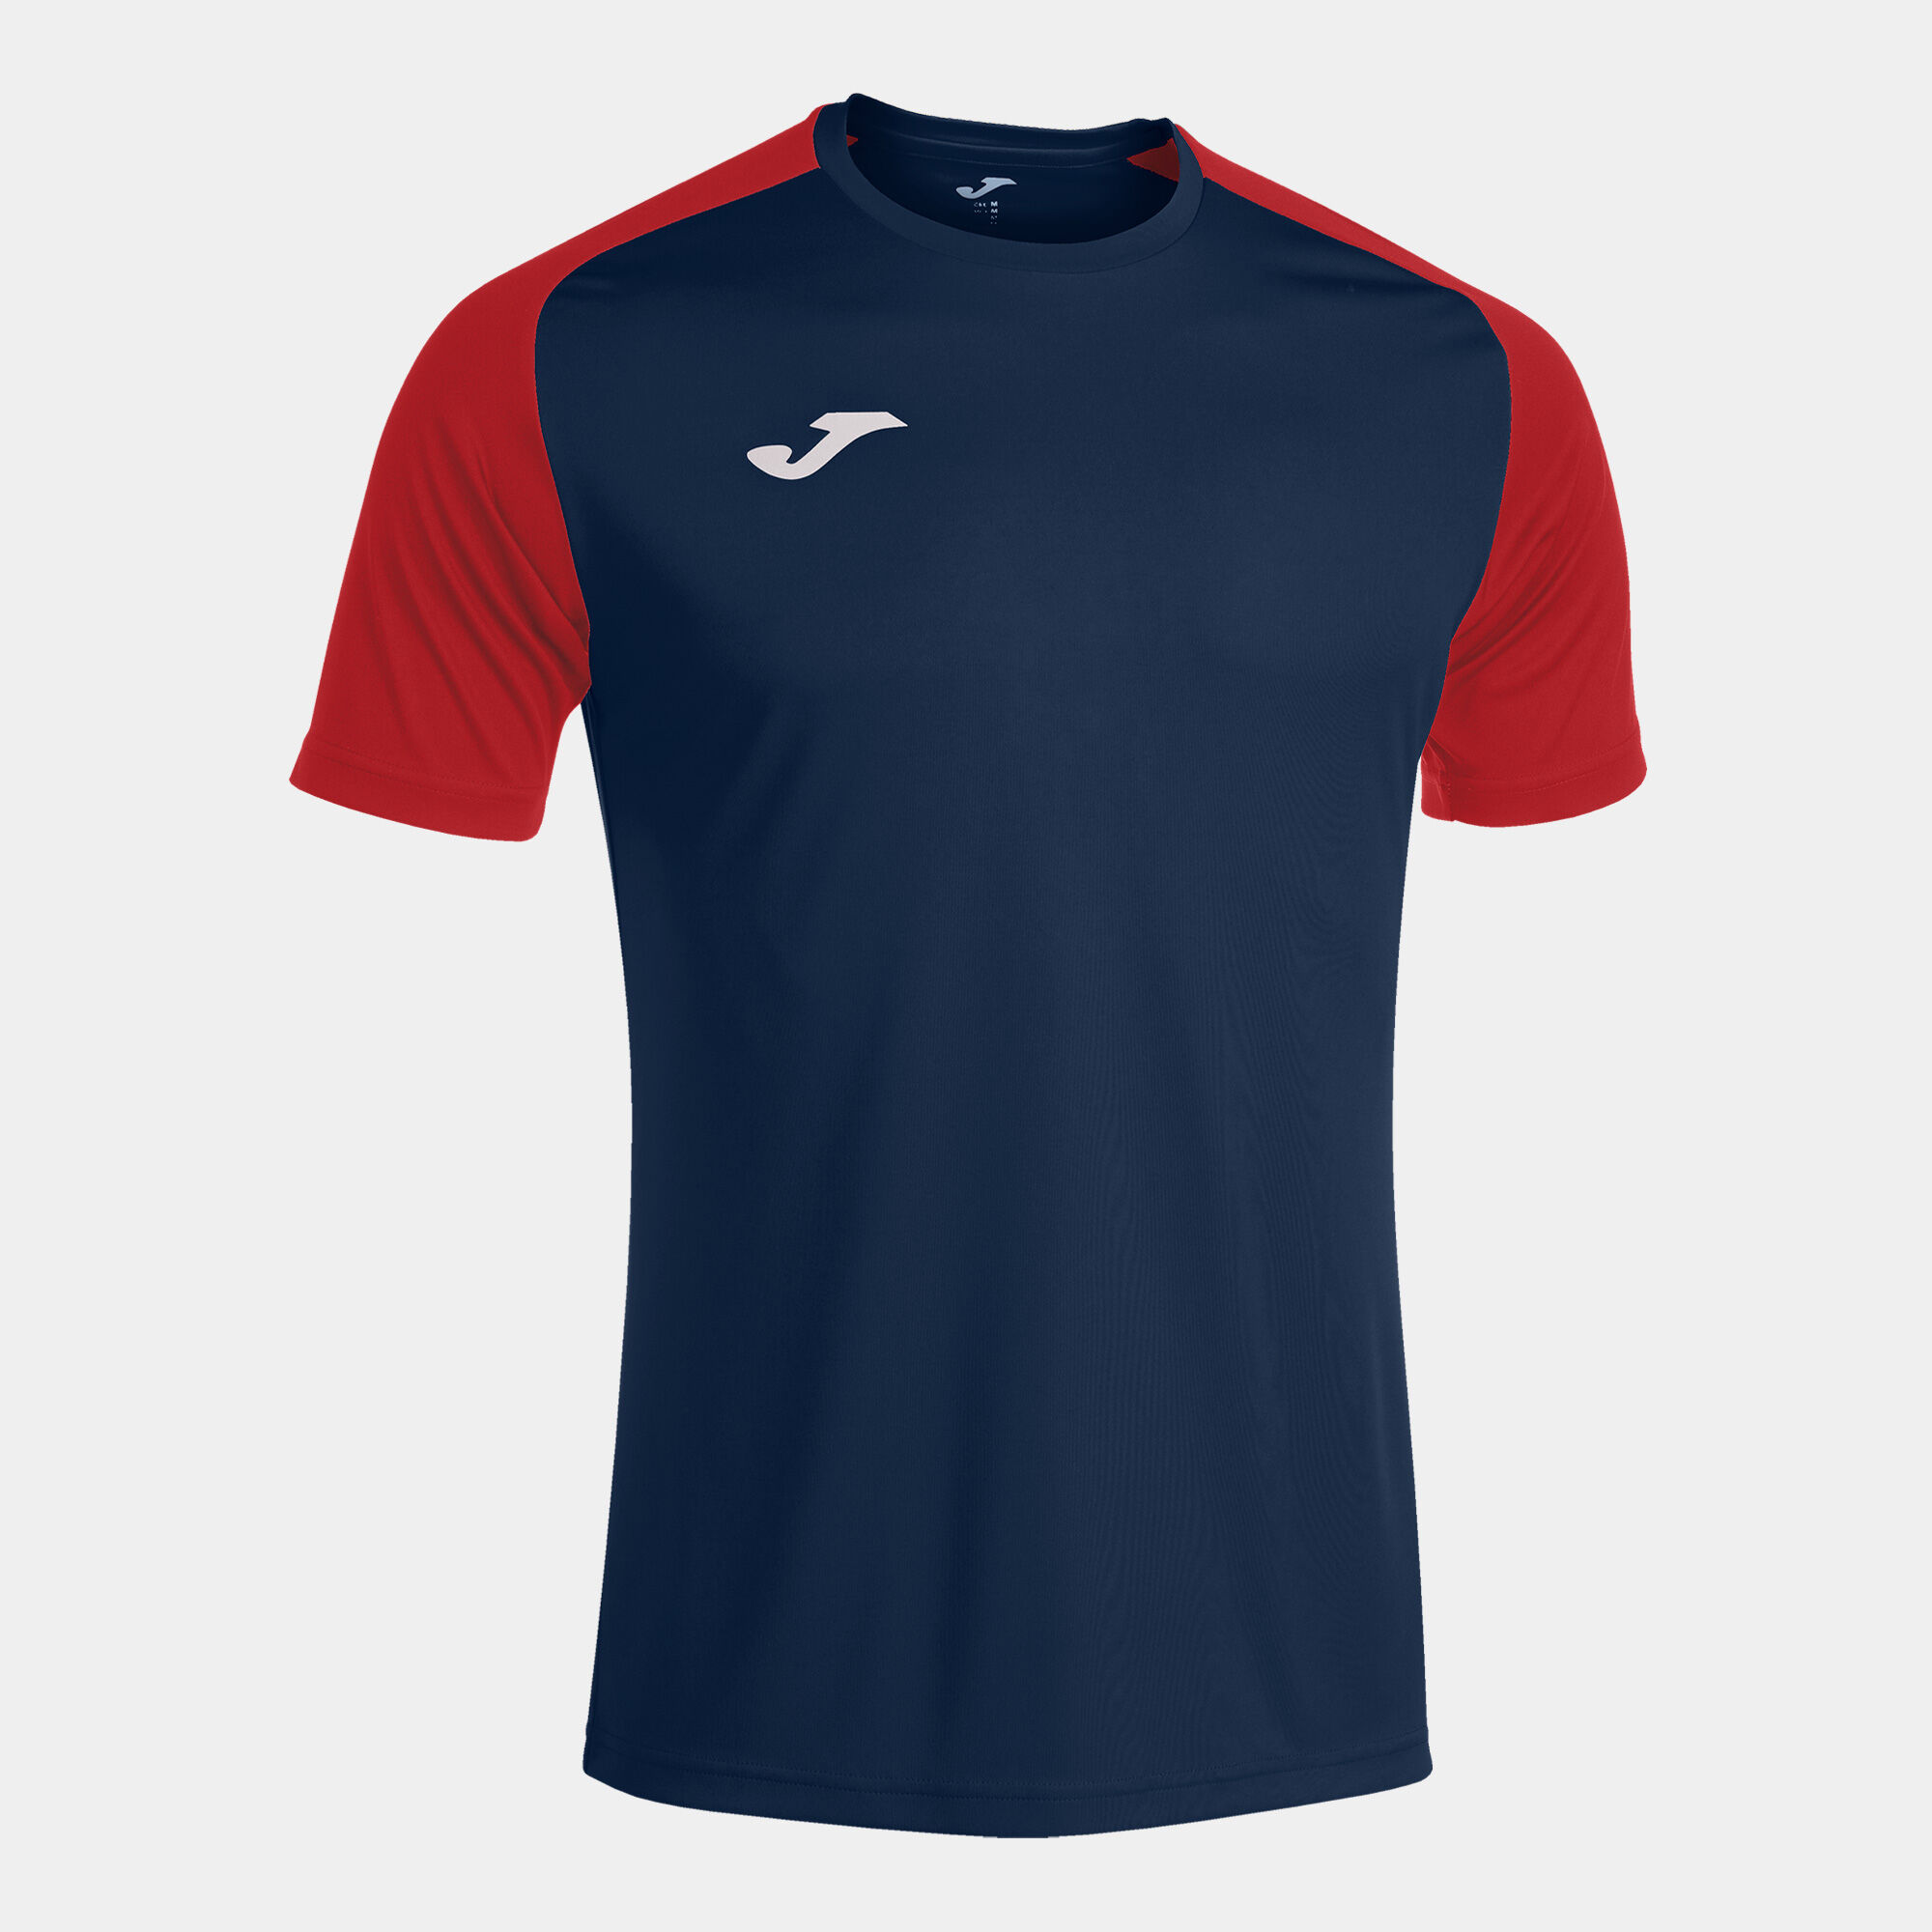 MAILLOT MANCHES COURTES HOMME ACADEMY IV BLEU MARINE ROUGE